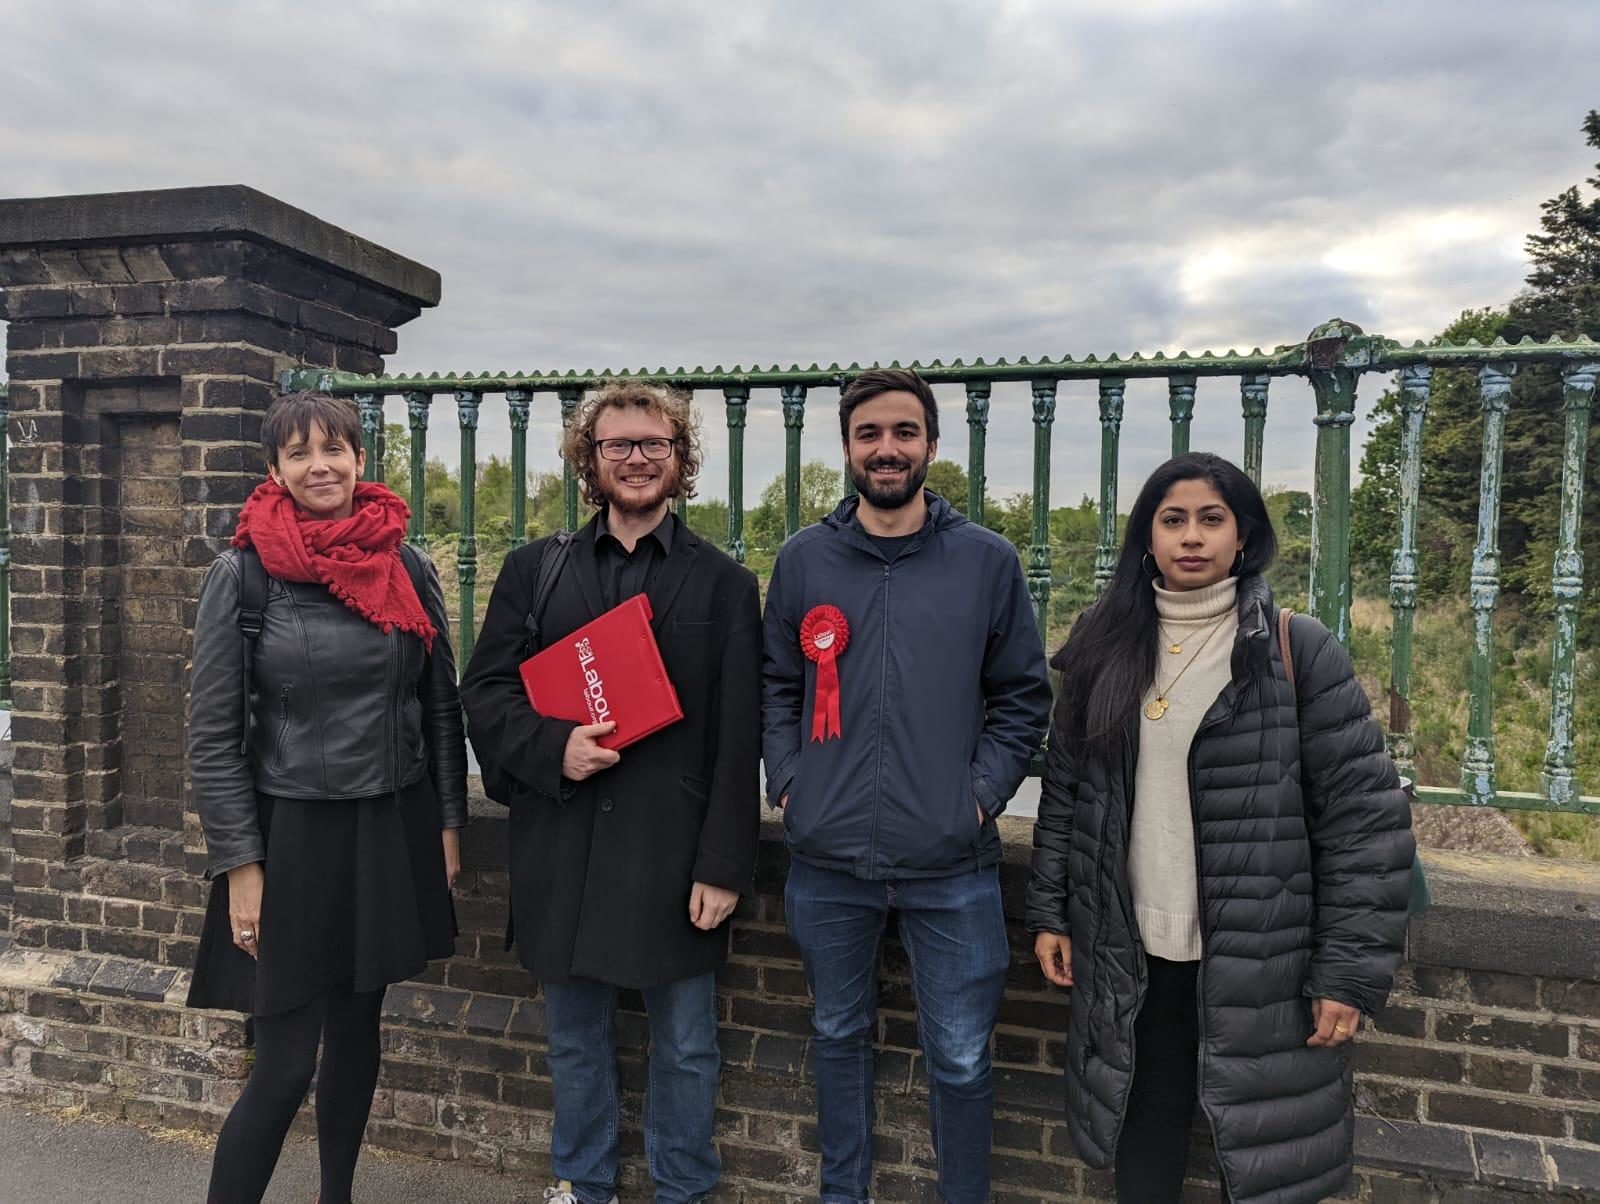 Labour GLA members Sakina Sheikh and Elly Baker with Surbiton Candidates Charlie Deacon and Conor Bollins